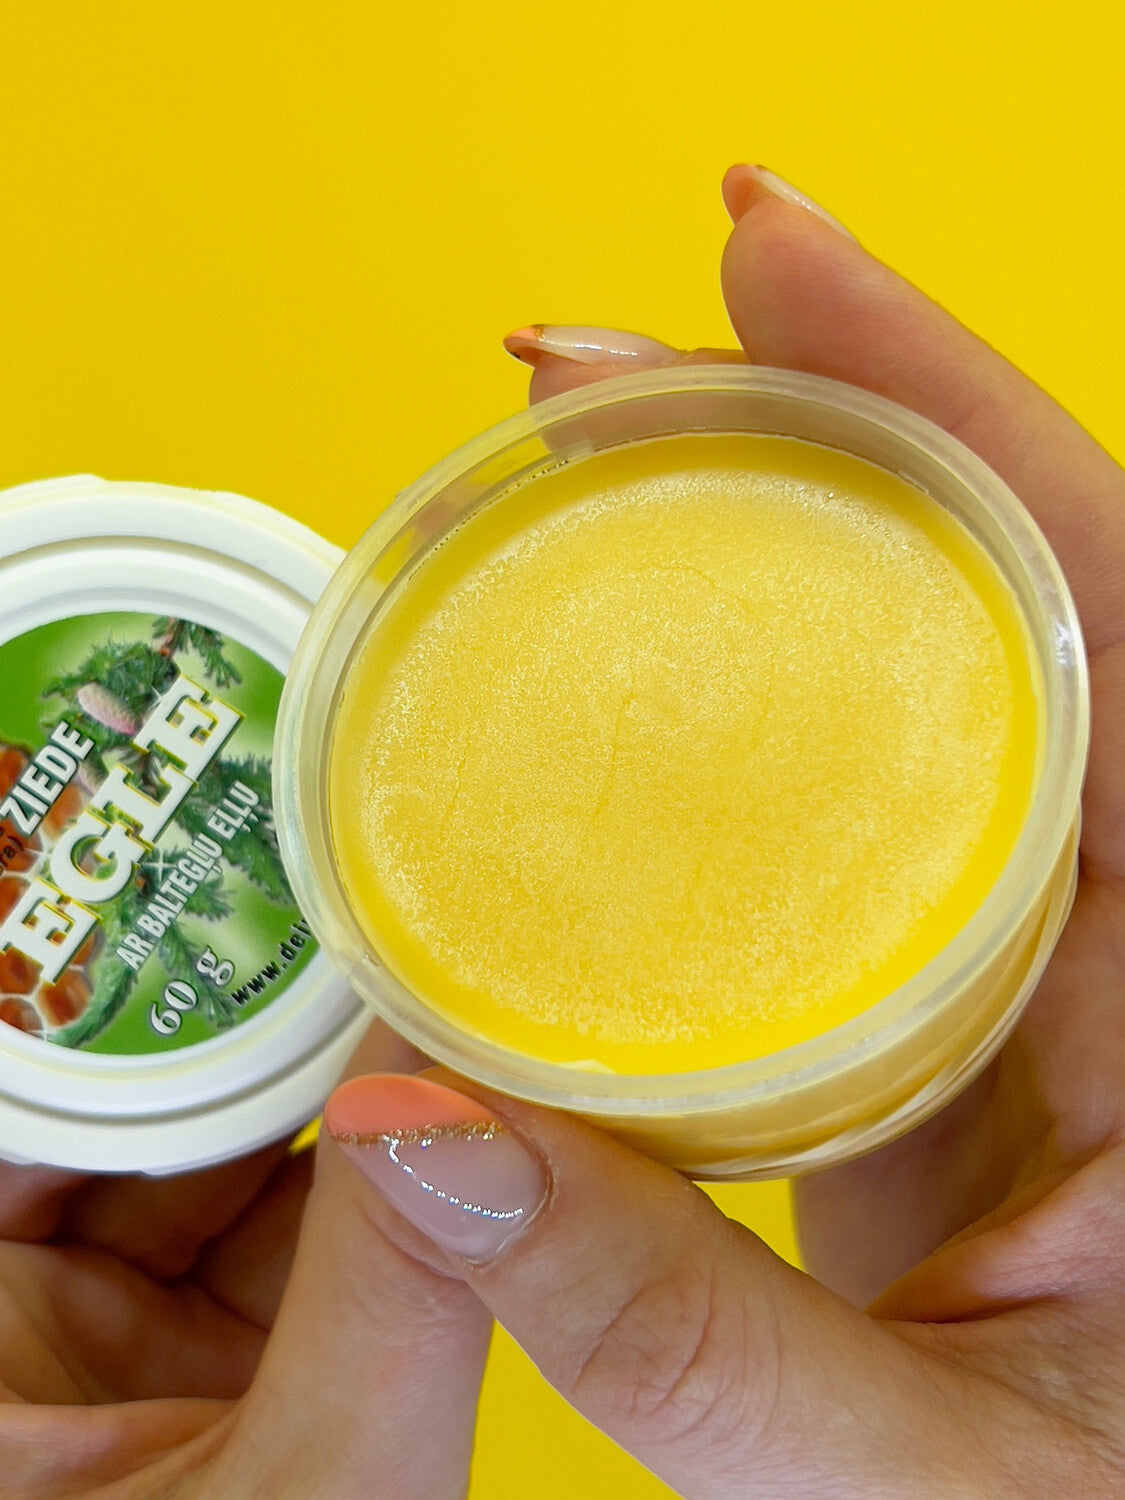 Beeswax ointment "Spruce" with white fir oil